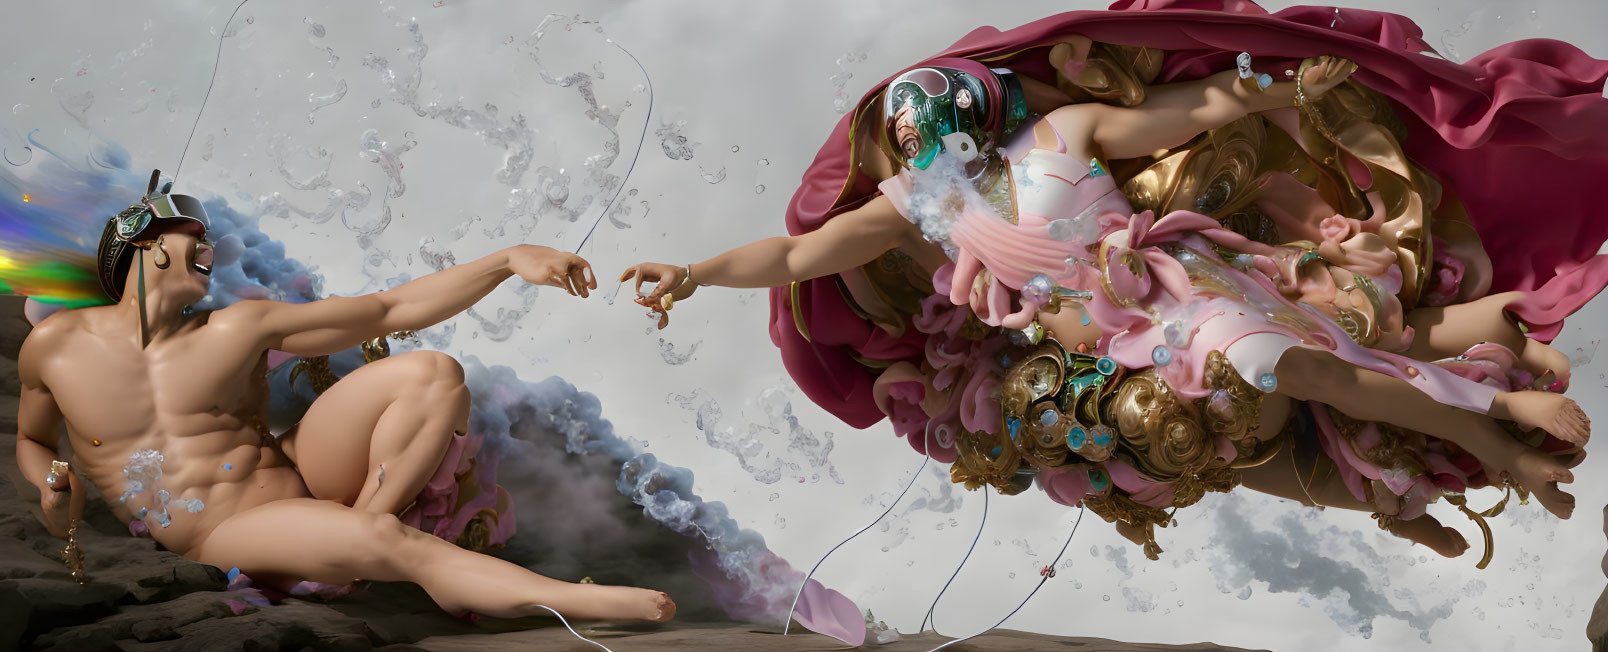 Surreal digital artwork: Figures with ornate headgear in dynamic water and cloud setting.